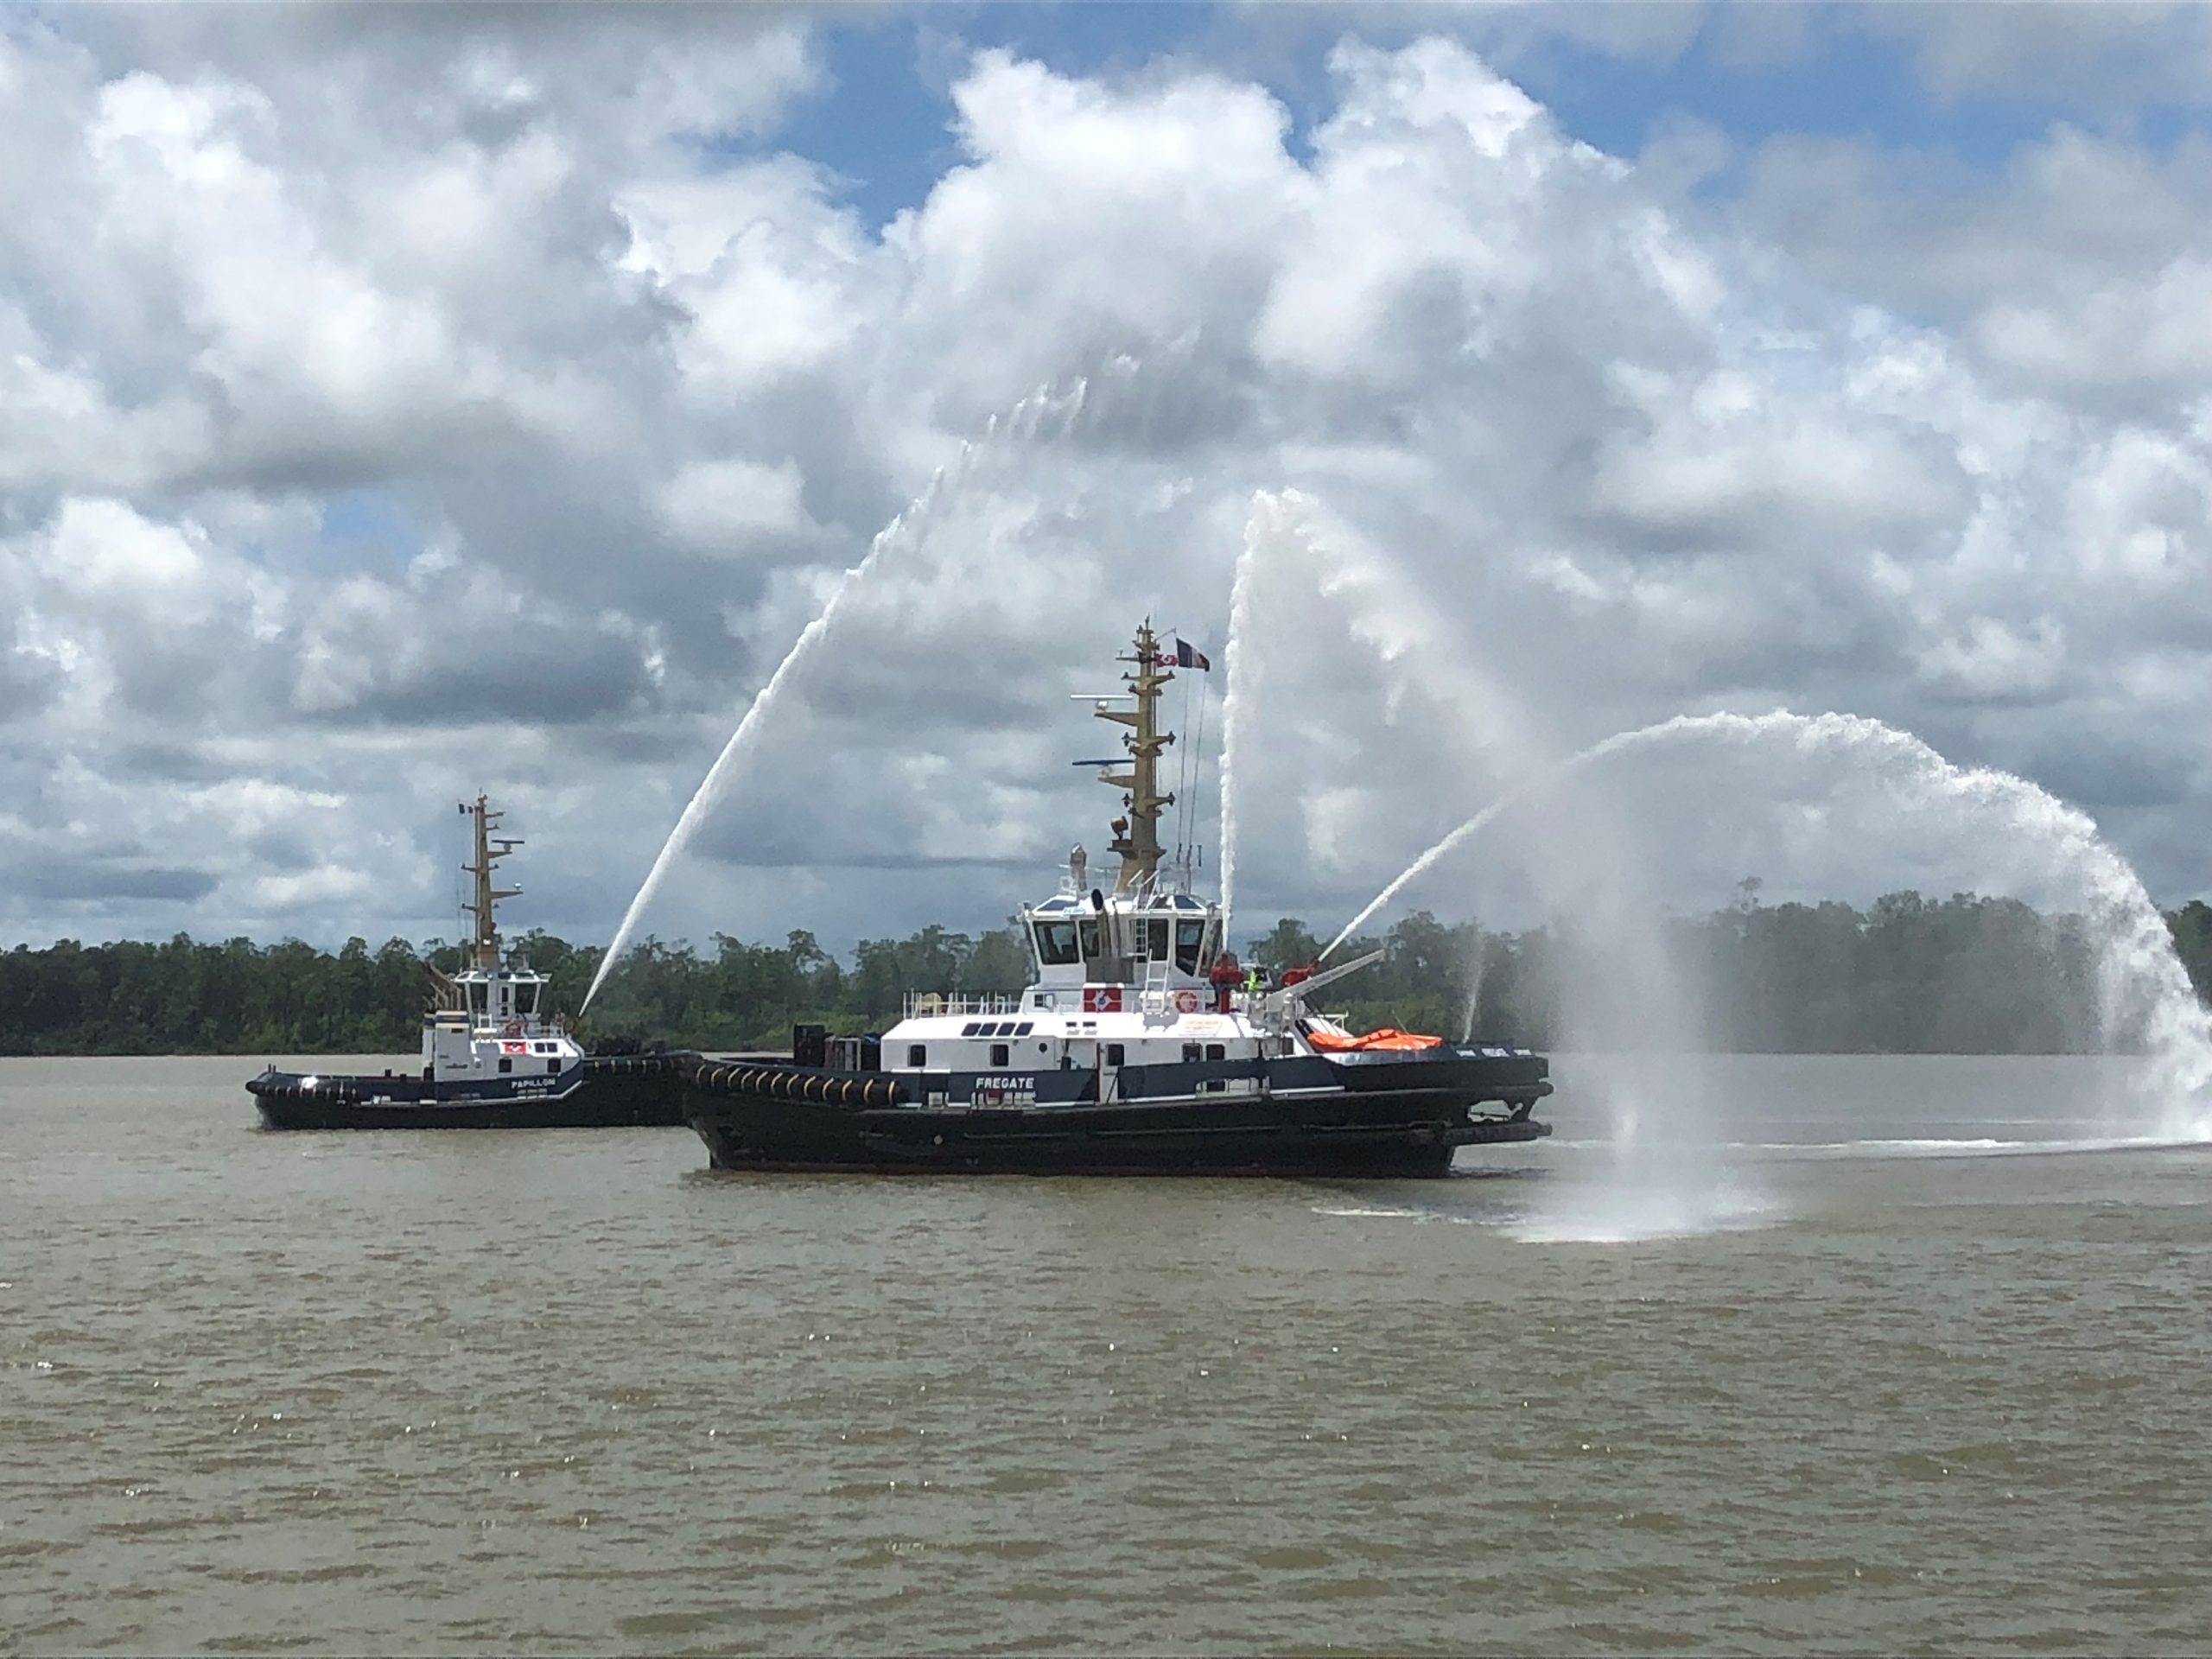 Two new vessels for Dutch Dredging